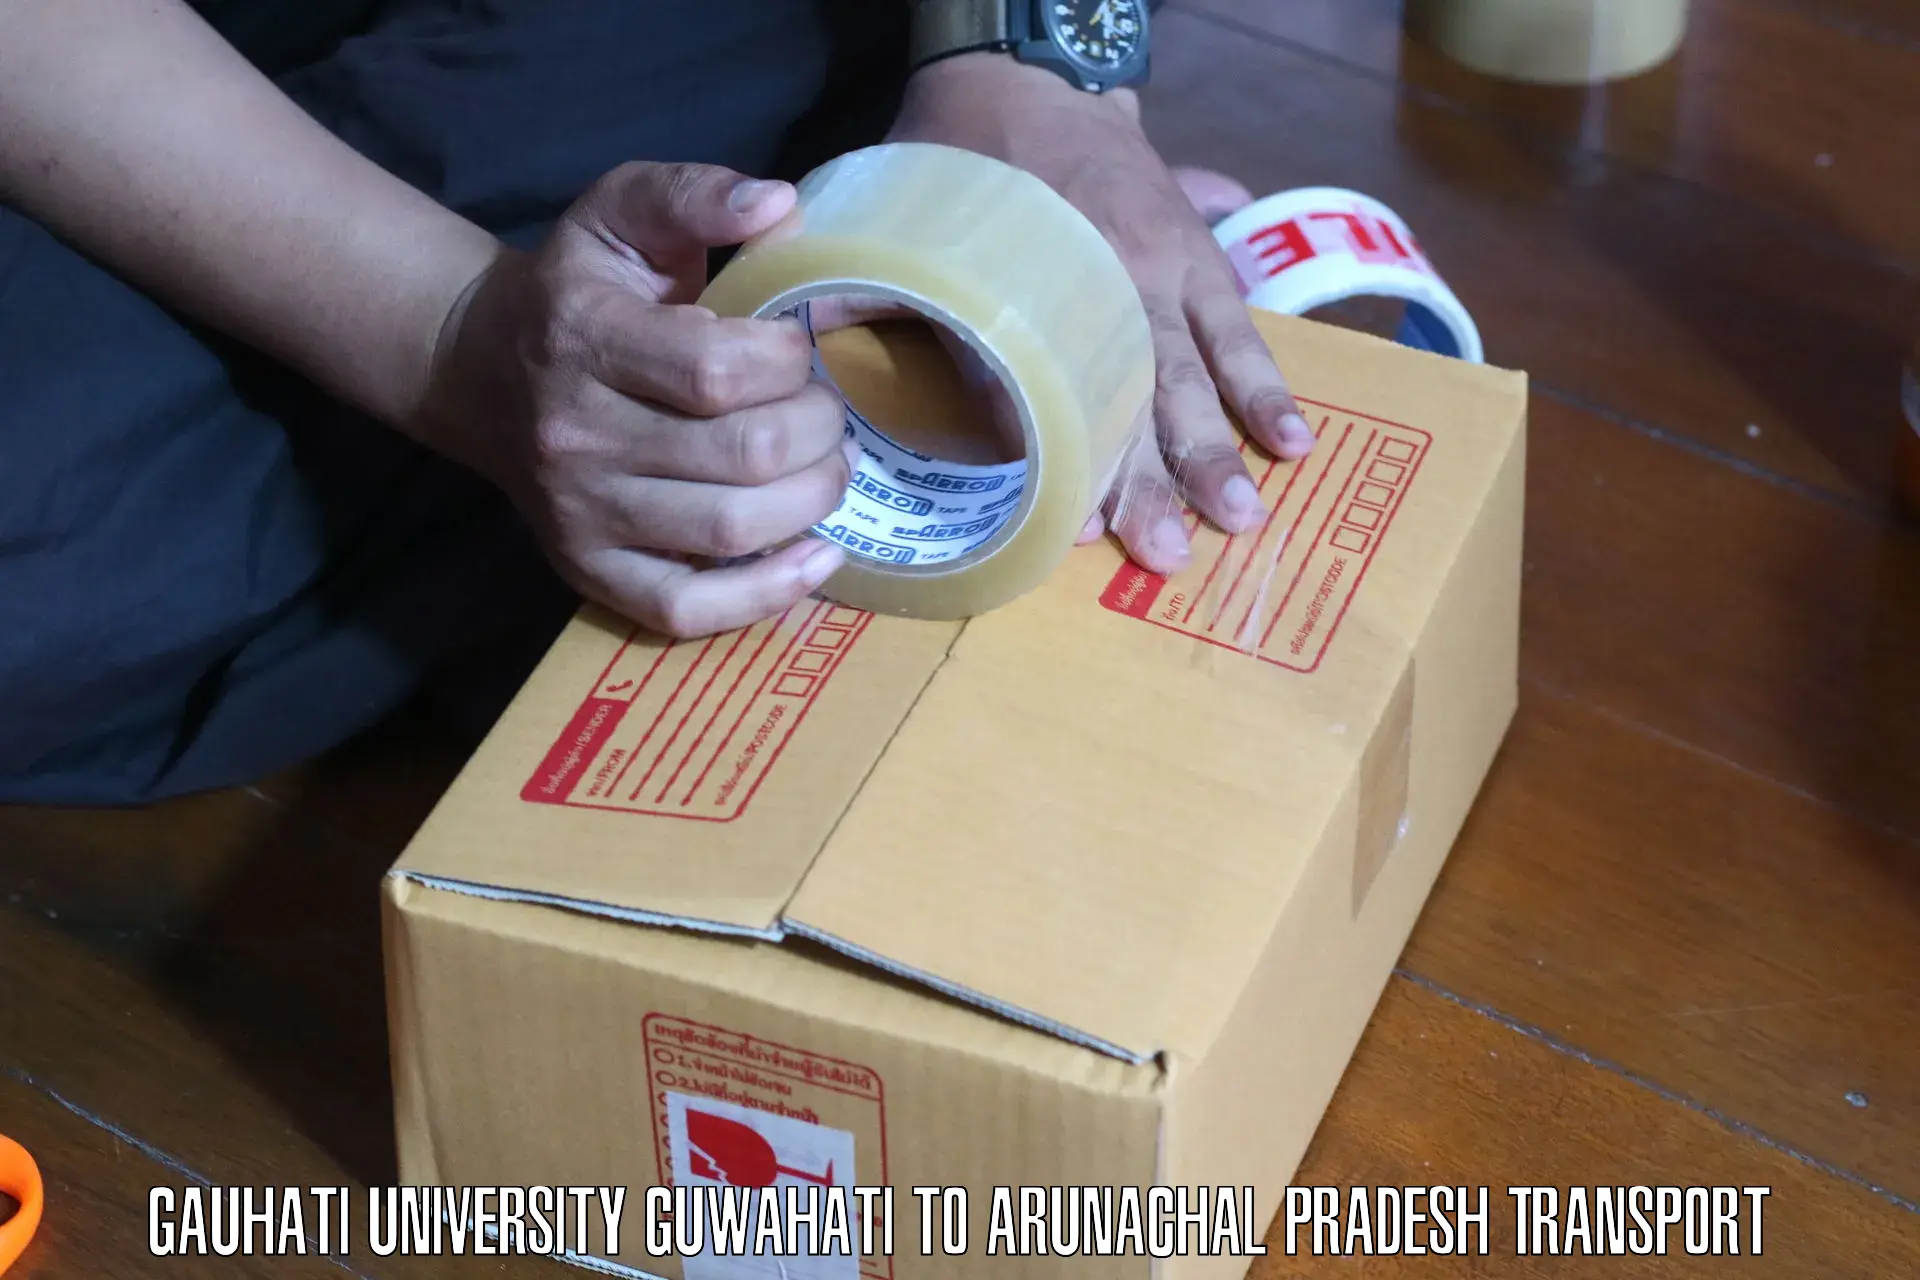 Package delivery services Gauhati University Guwahati to Aalo